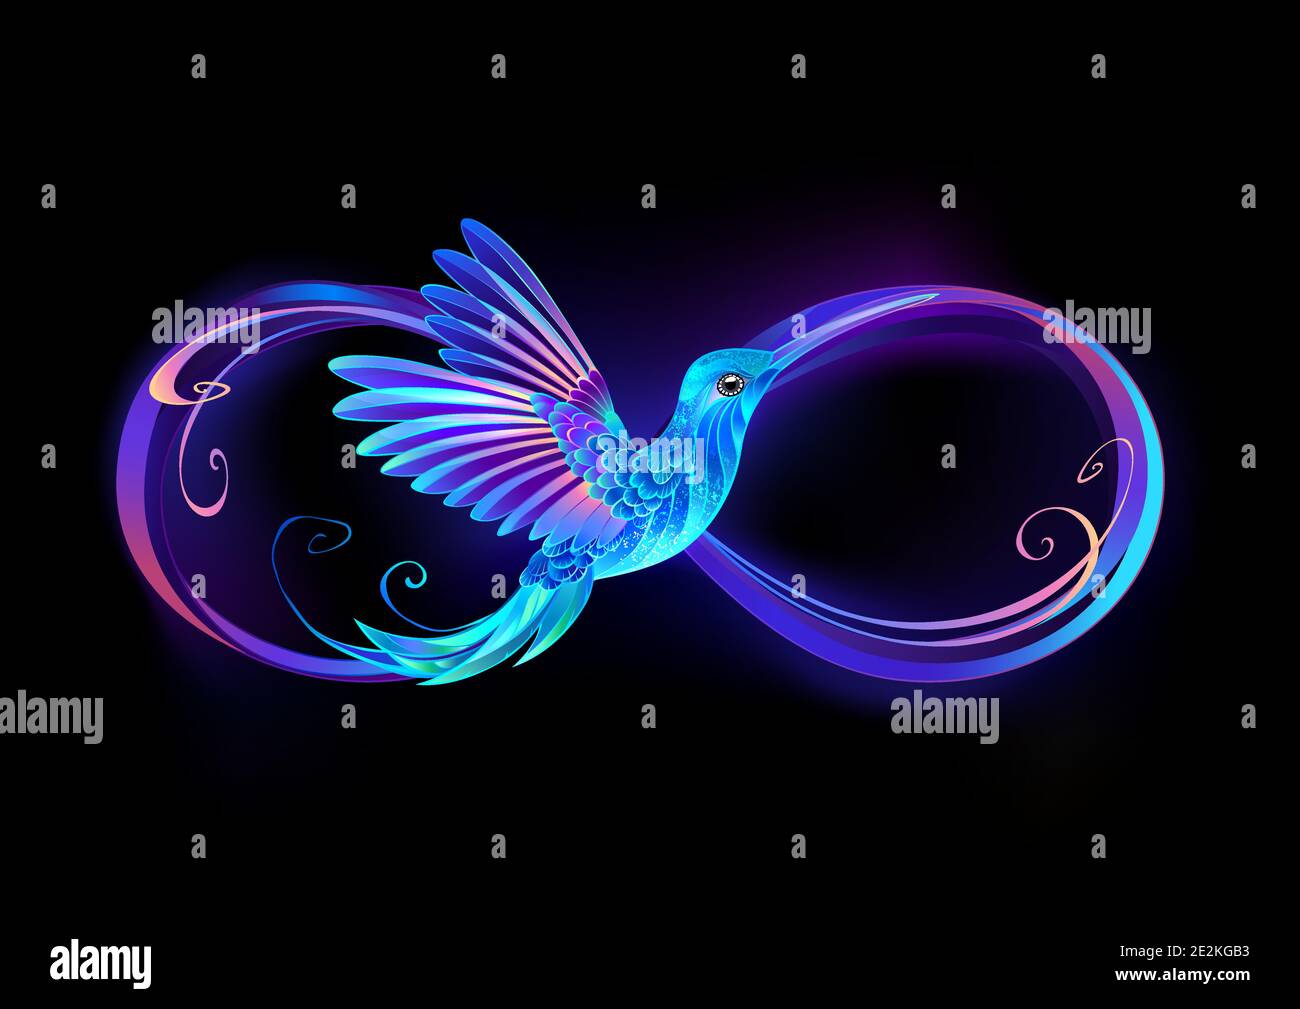 Glowing, purple infinity symbol with flying, luminous, blue hummingbird on black background. Stock Vector